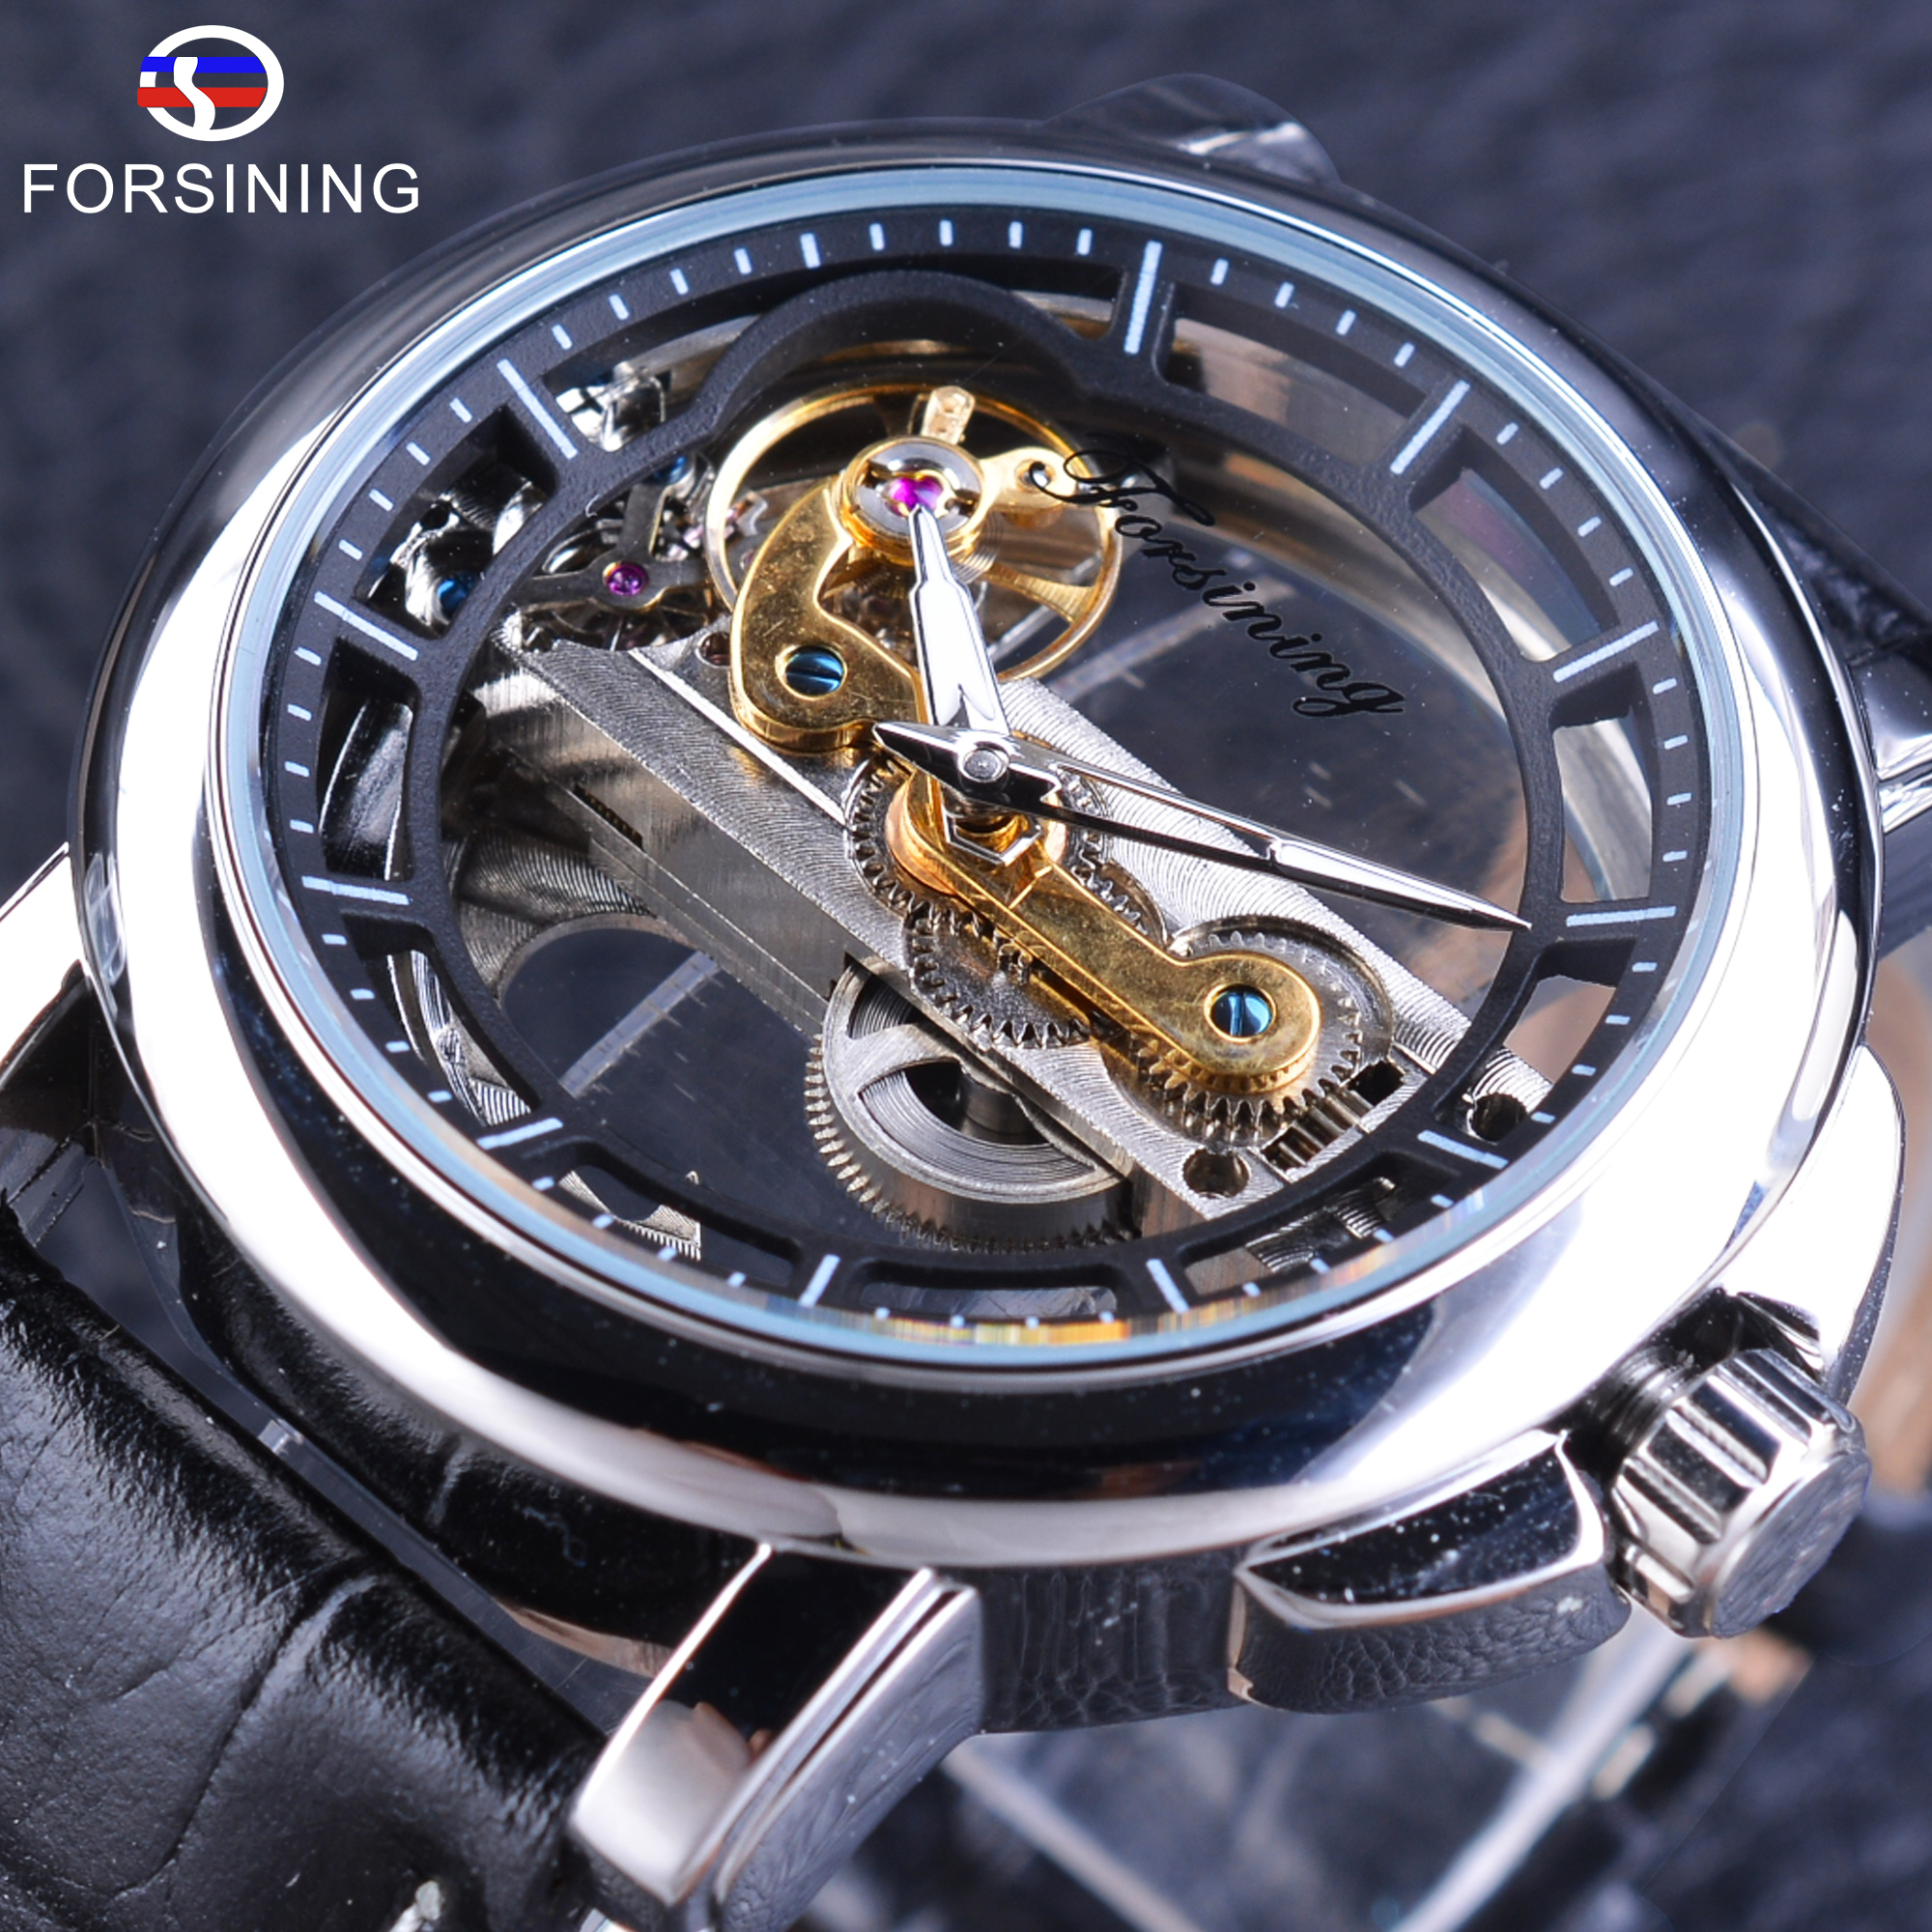 Forsining Men's Mechanical Watches with Automatic Winding Waterproof ...